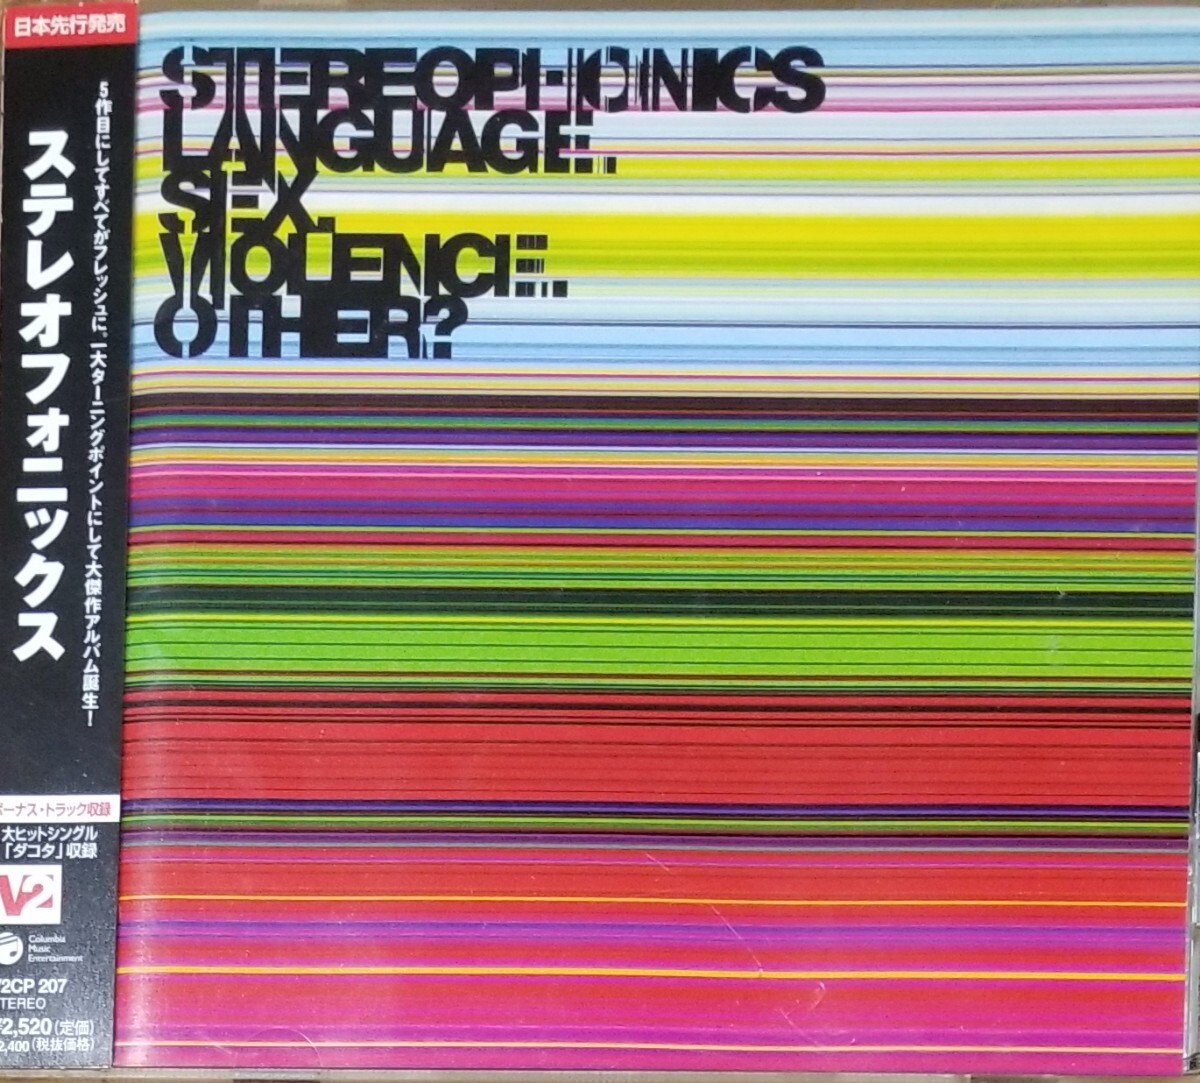 X17日本盤帯付き■STEREOPHONICS(ステレオフォニックス)「LanguageSexViolenceOther?」CD_画像1